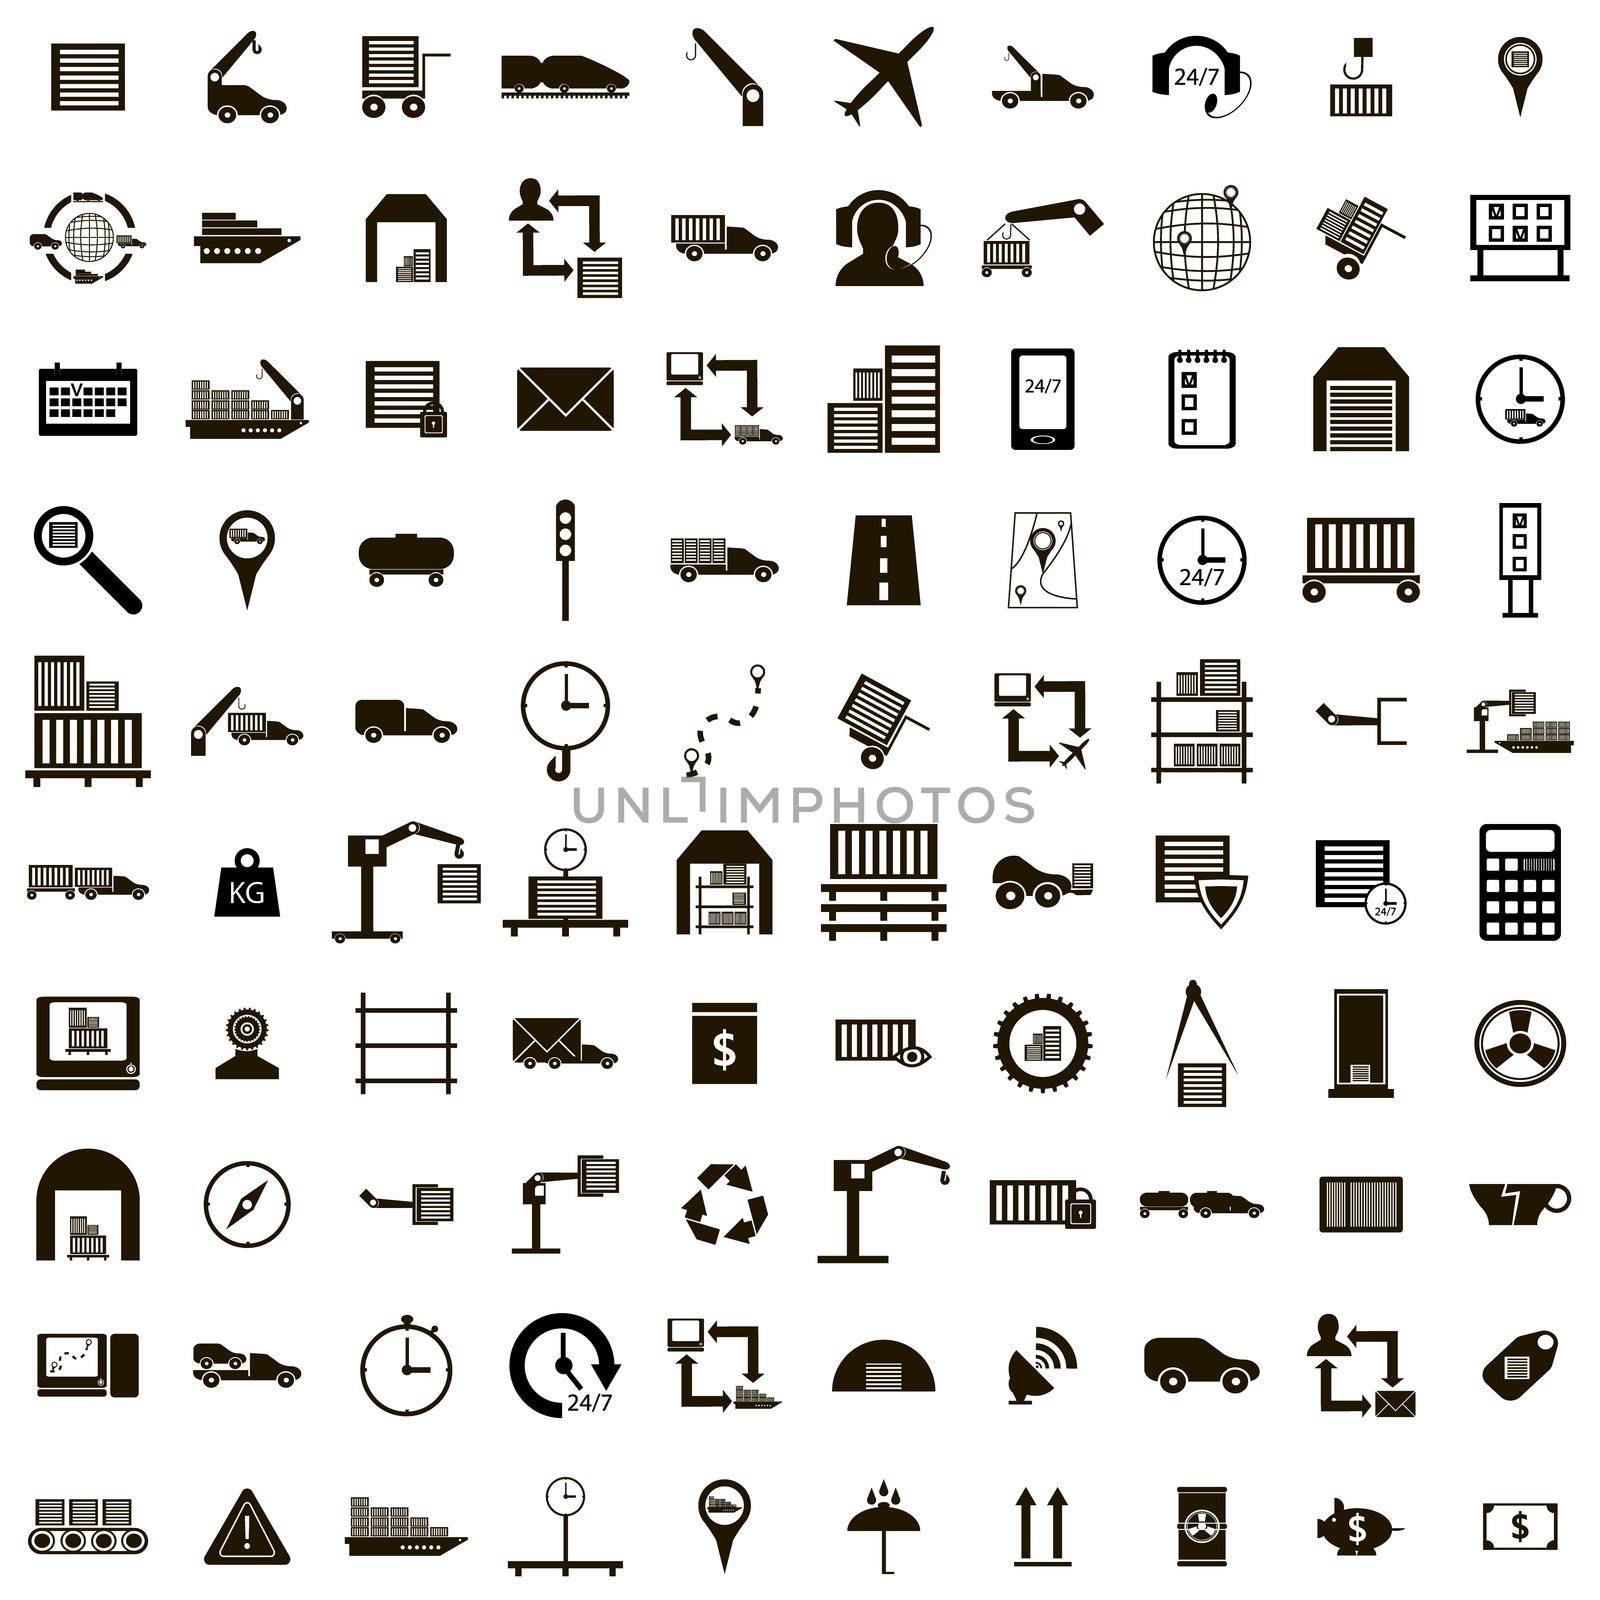 100 Logistics icons set, simple style by ylivdesign